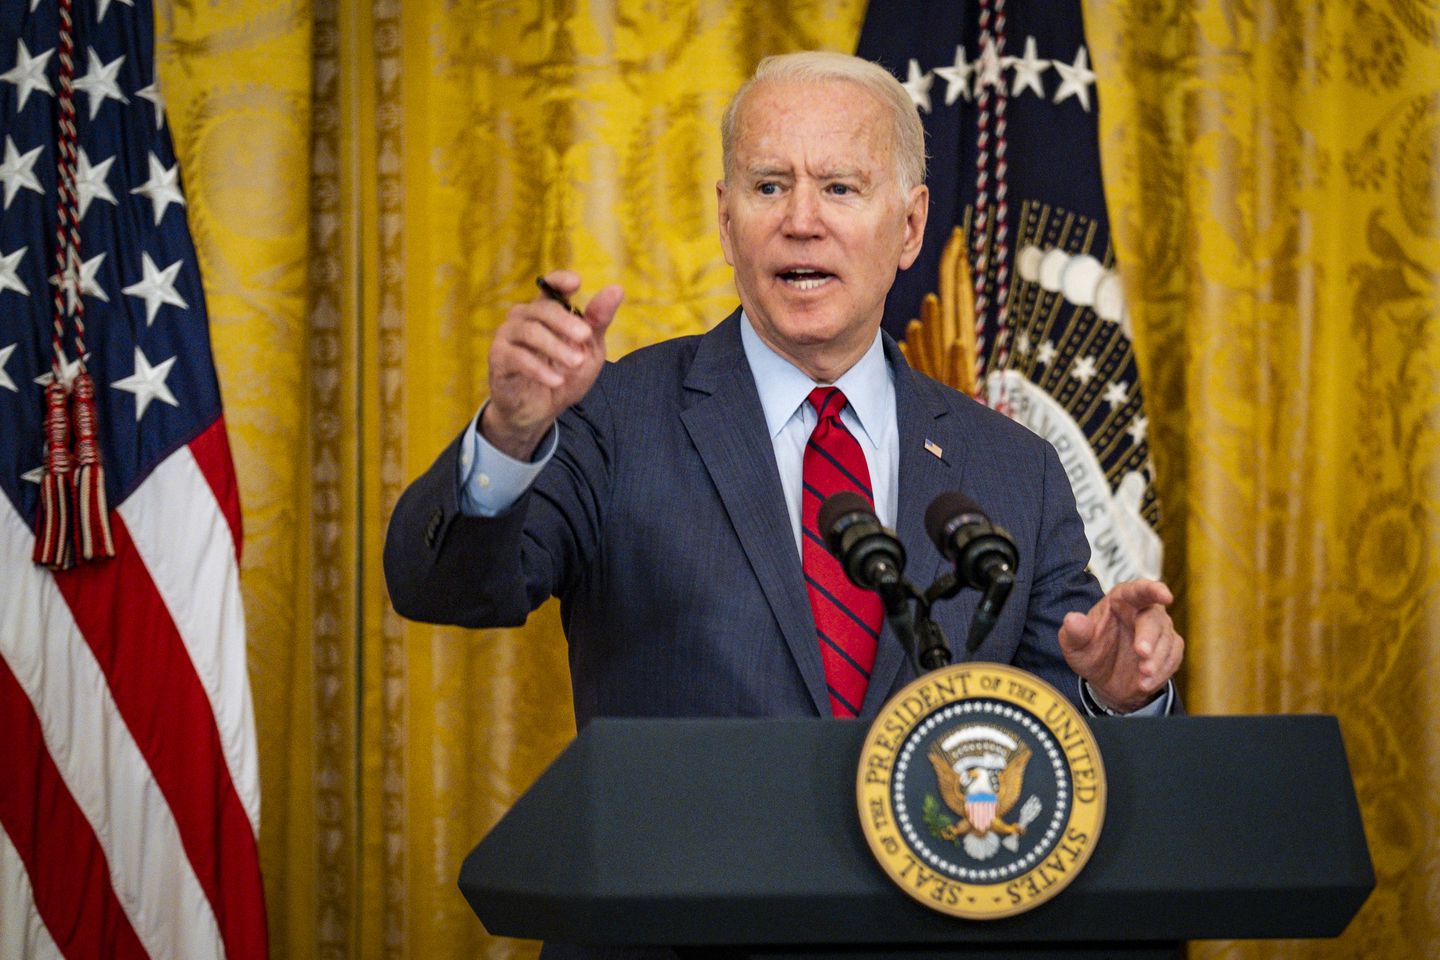 Biden Vows to Evacuate Thousands of Afghans Who Helped US